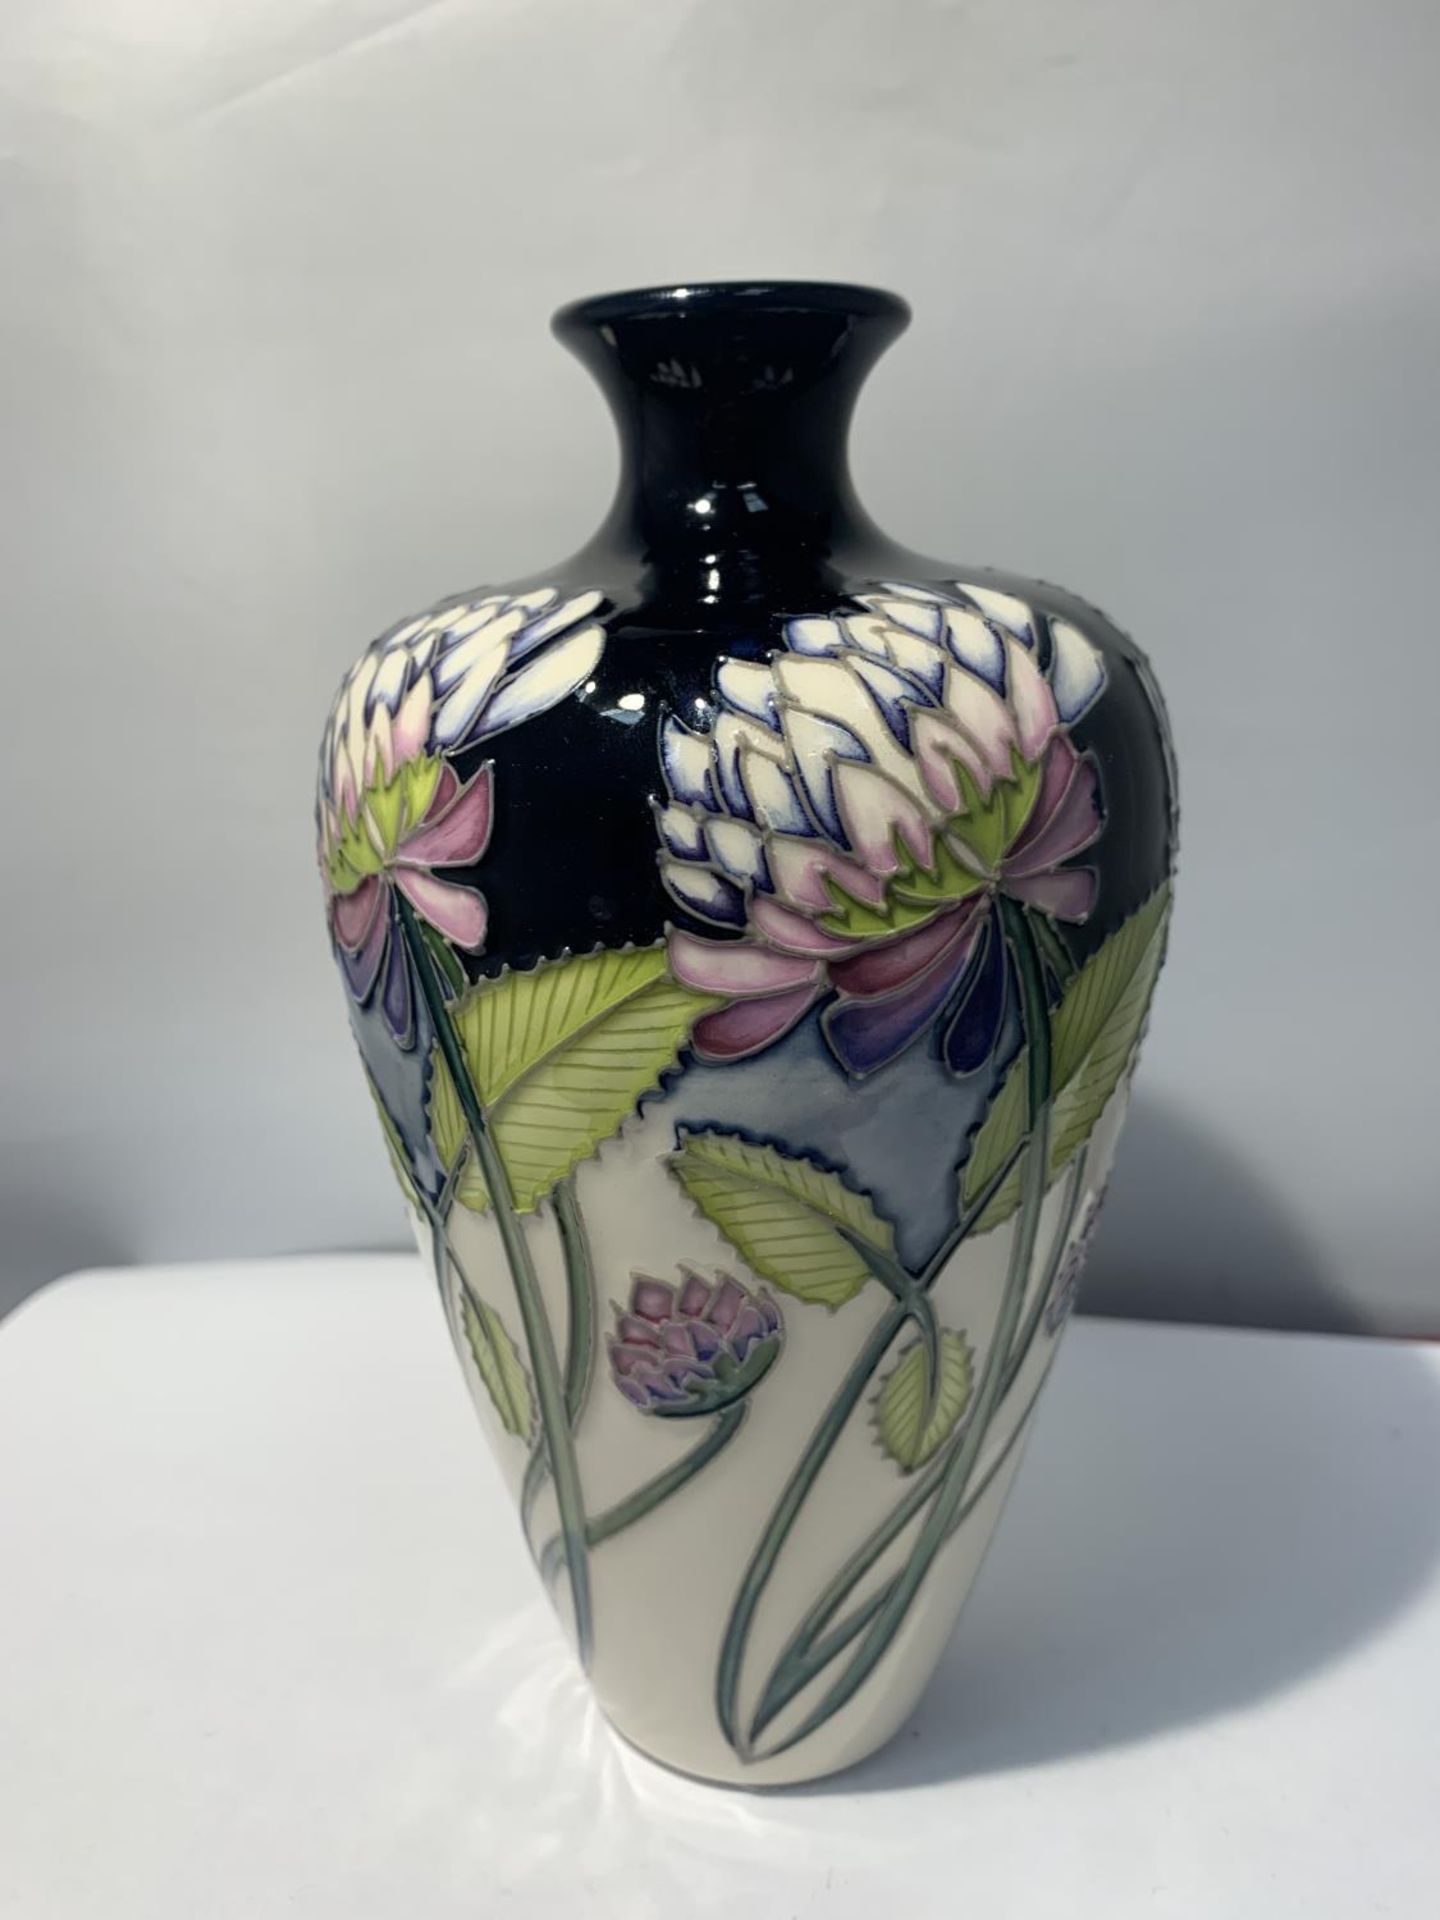 A MOORCROFT TREFOIL VASE 6 INCHES TALL - Image 2 of 3